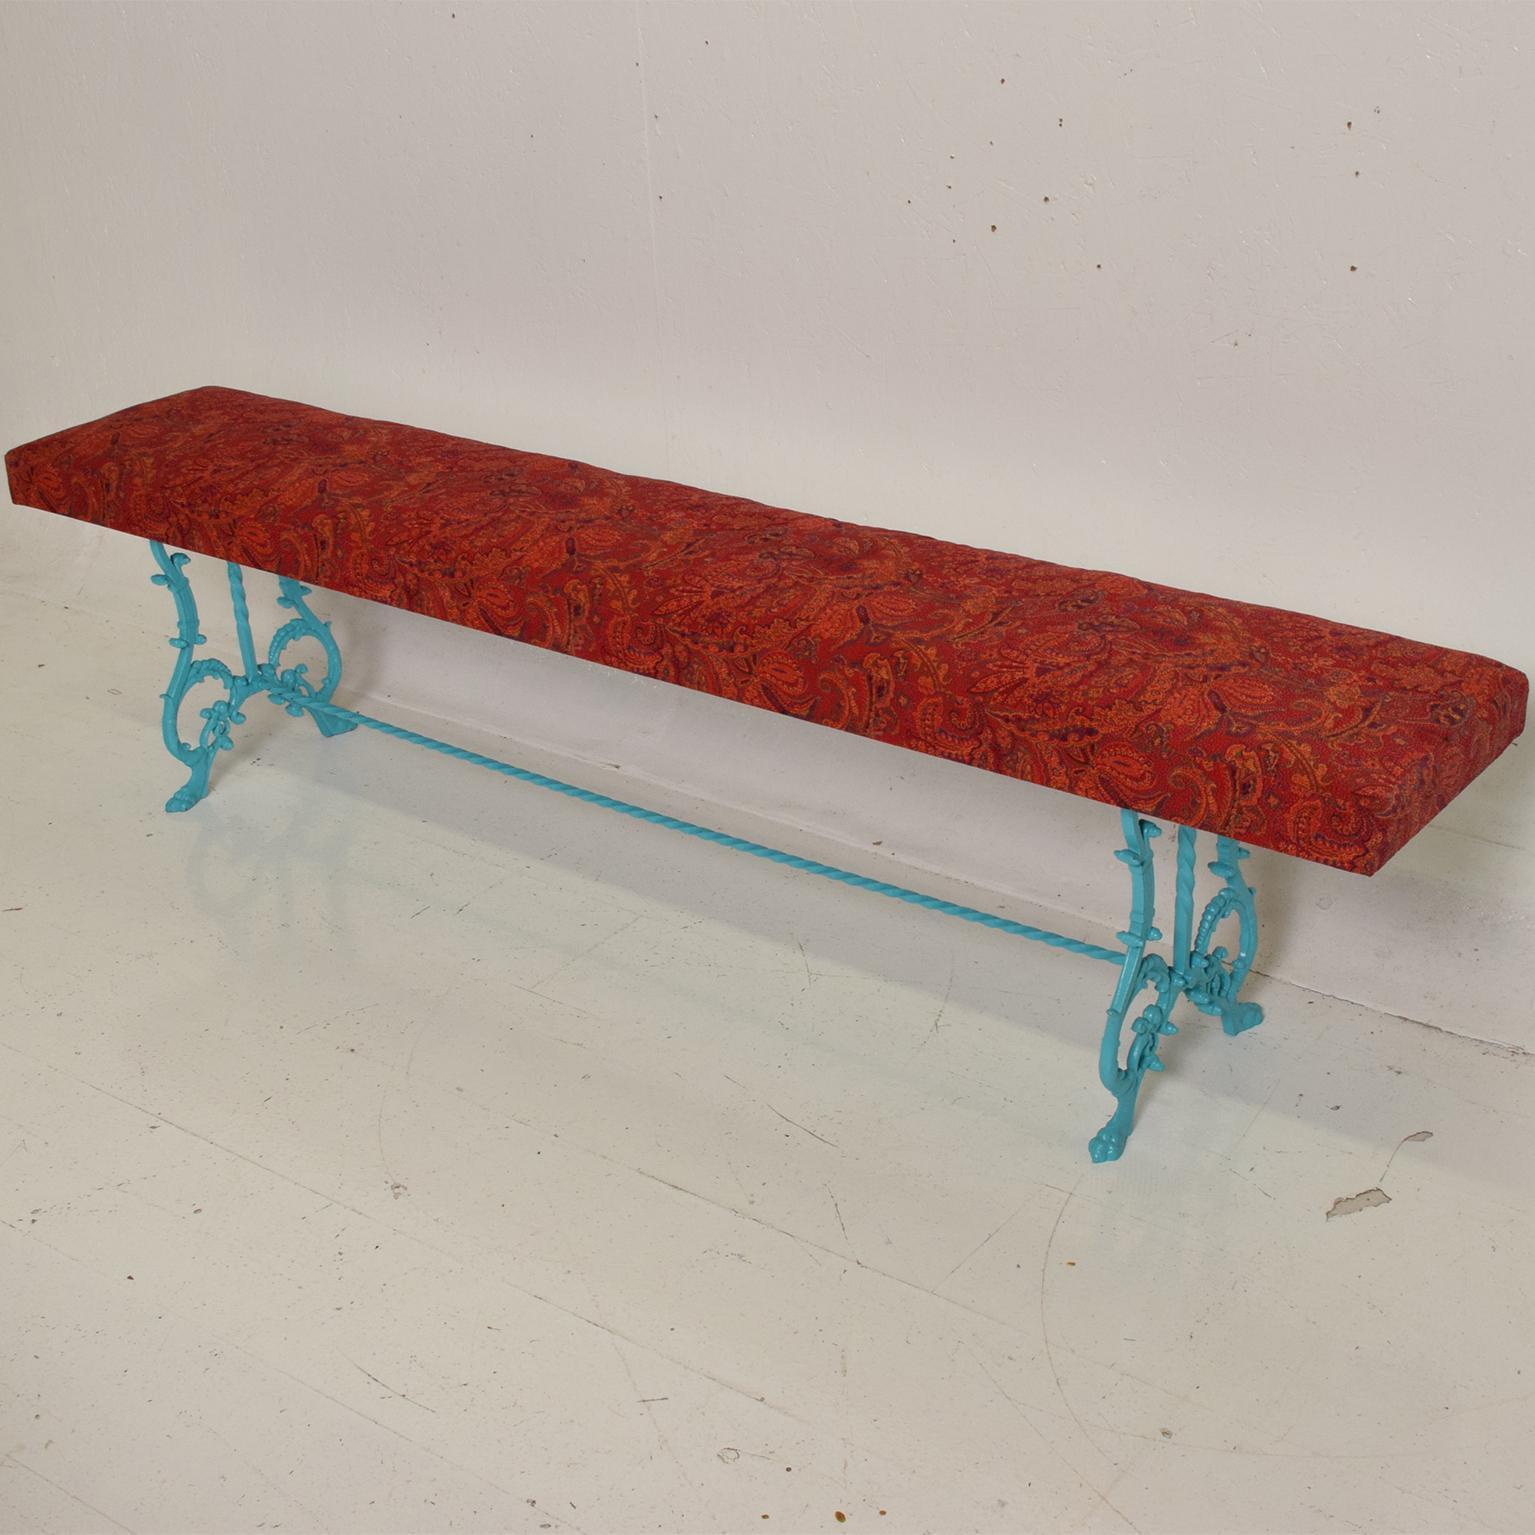 Hollywood Regency 1970s Scrolled Wrought Iron Bench New Paisley Upholstery